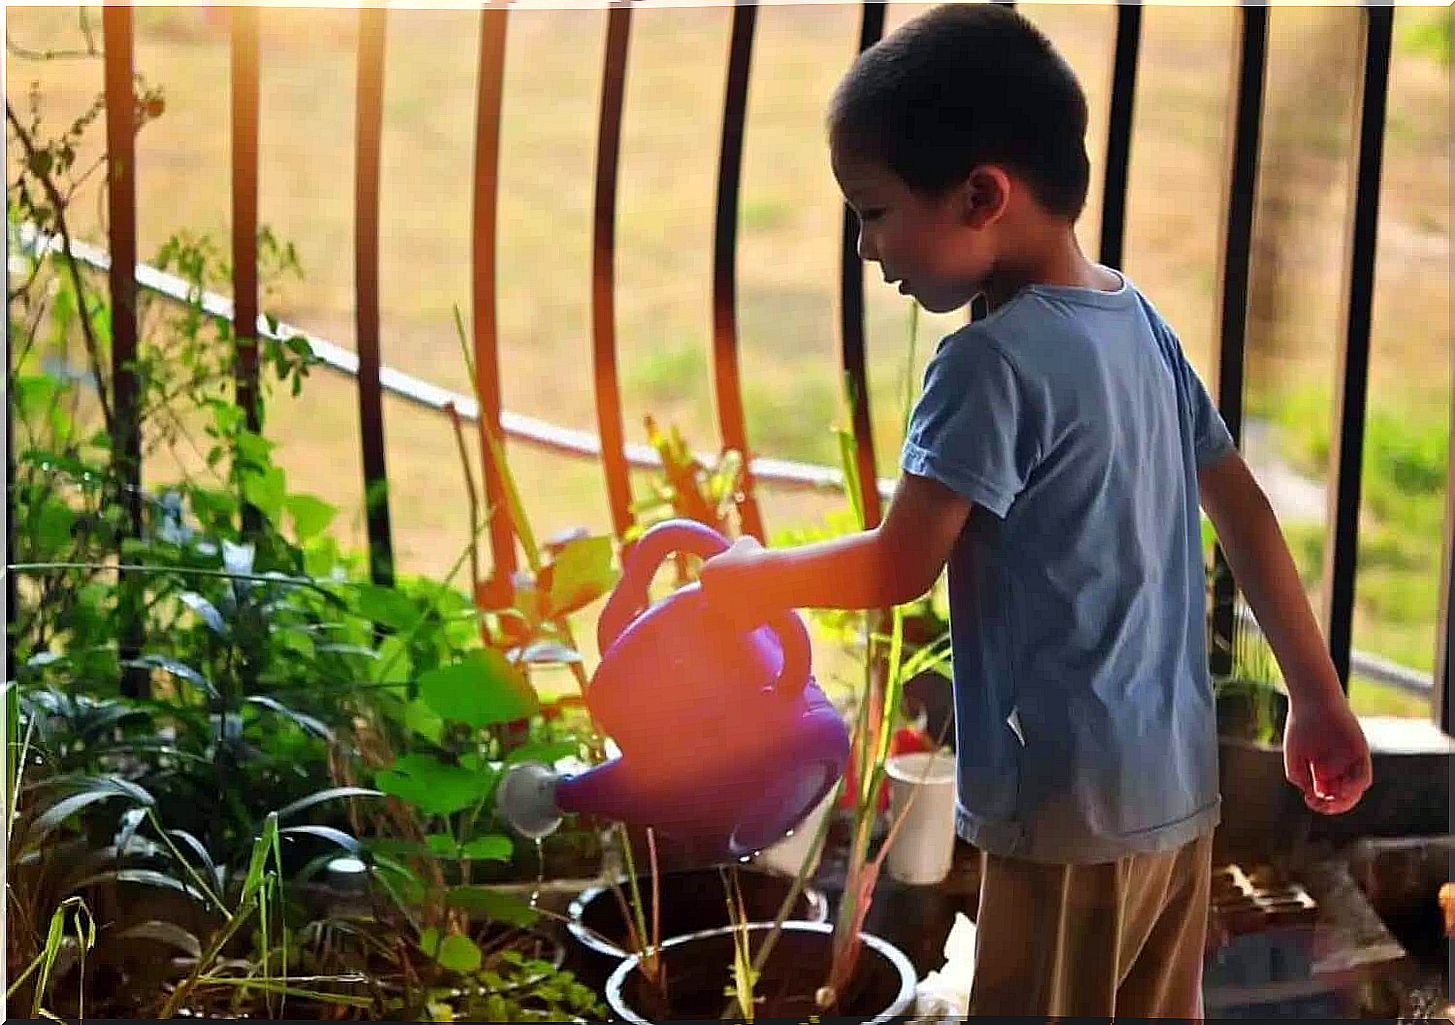 A child who learns to take responsibility by watering the flowers